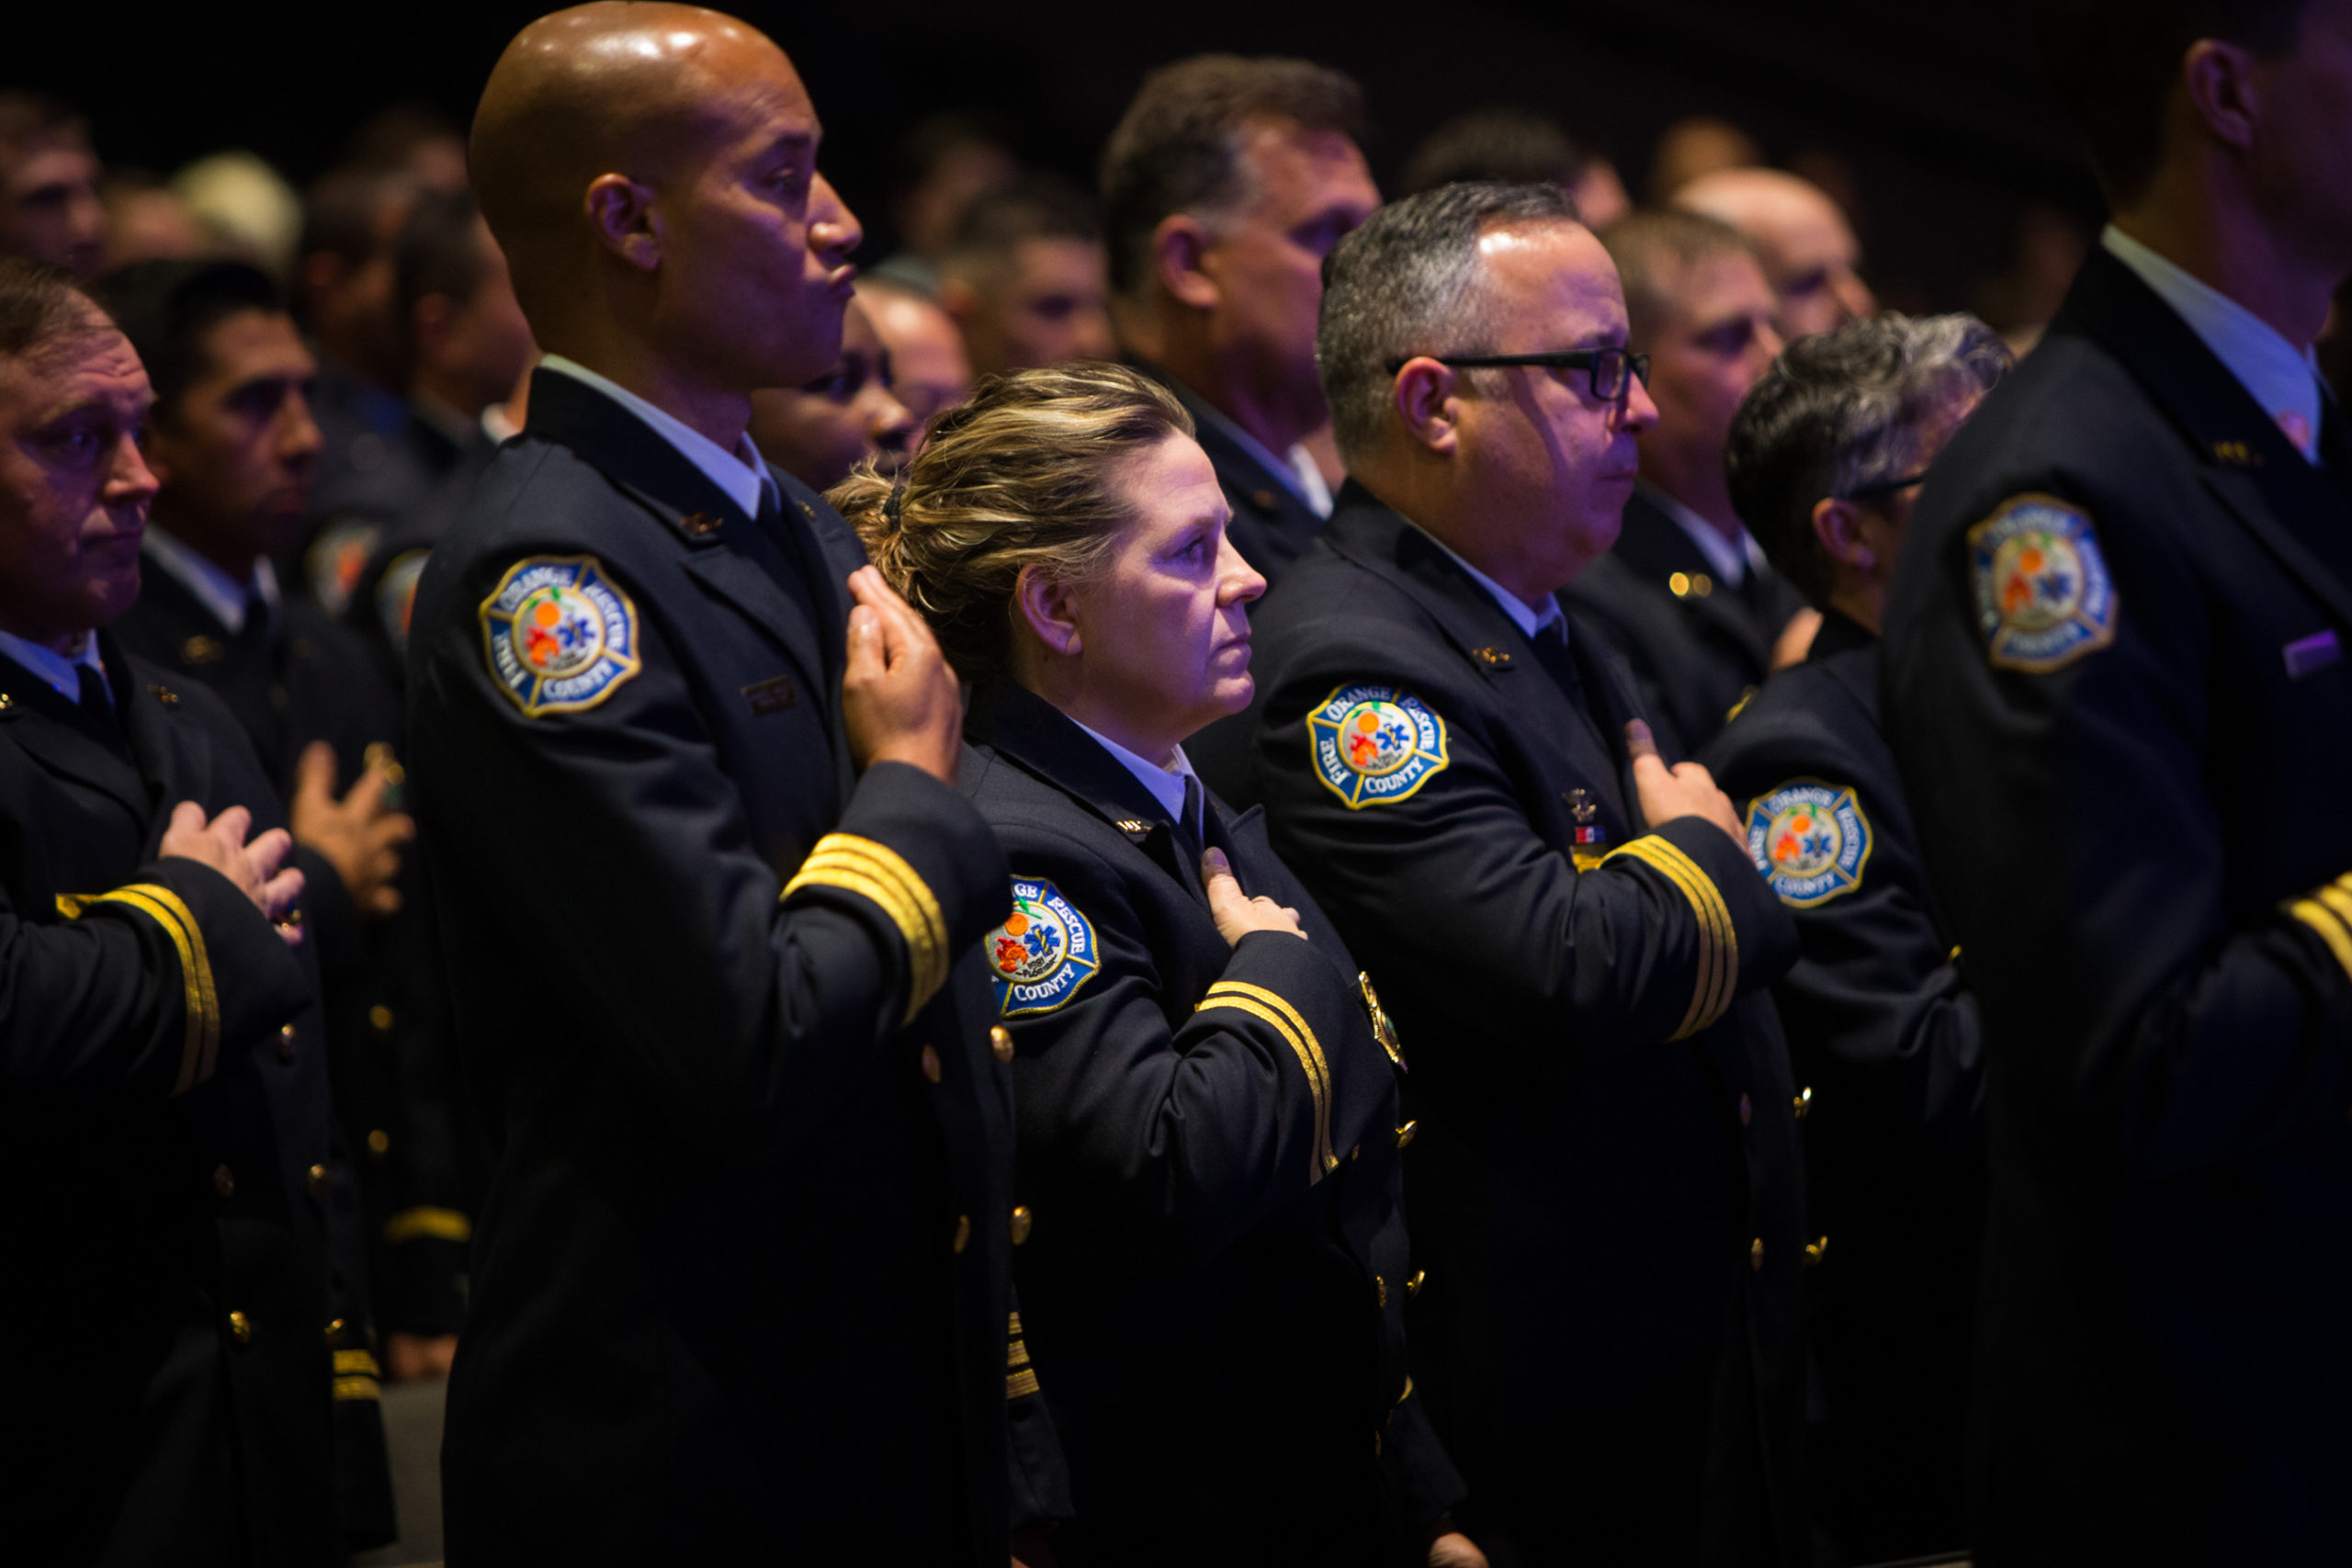 Orange County Fire Rescue celebrated a promotional ceremony for officers, firefighters and administrators on November 18, 2021, the first one since the beginning of the COVID-19 pandemic.